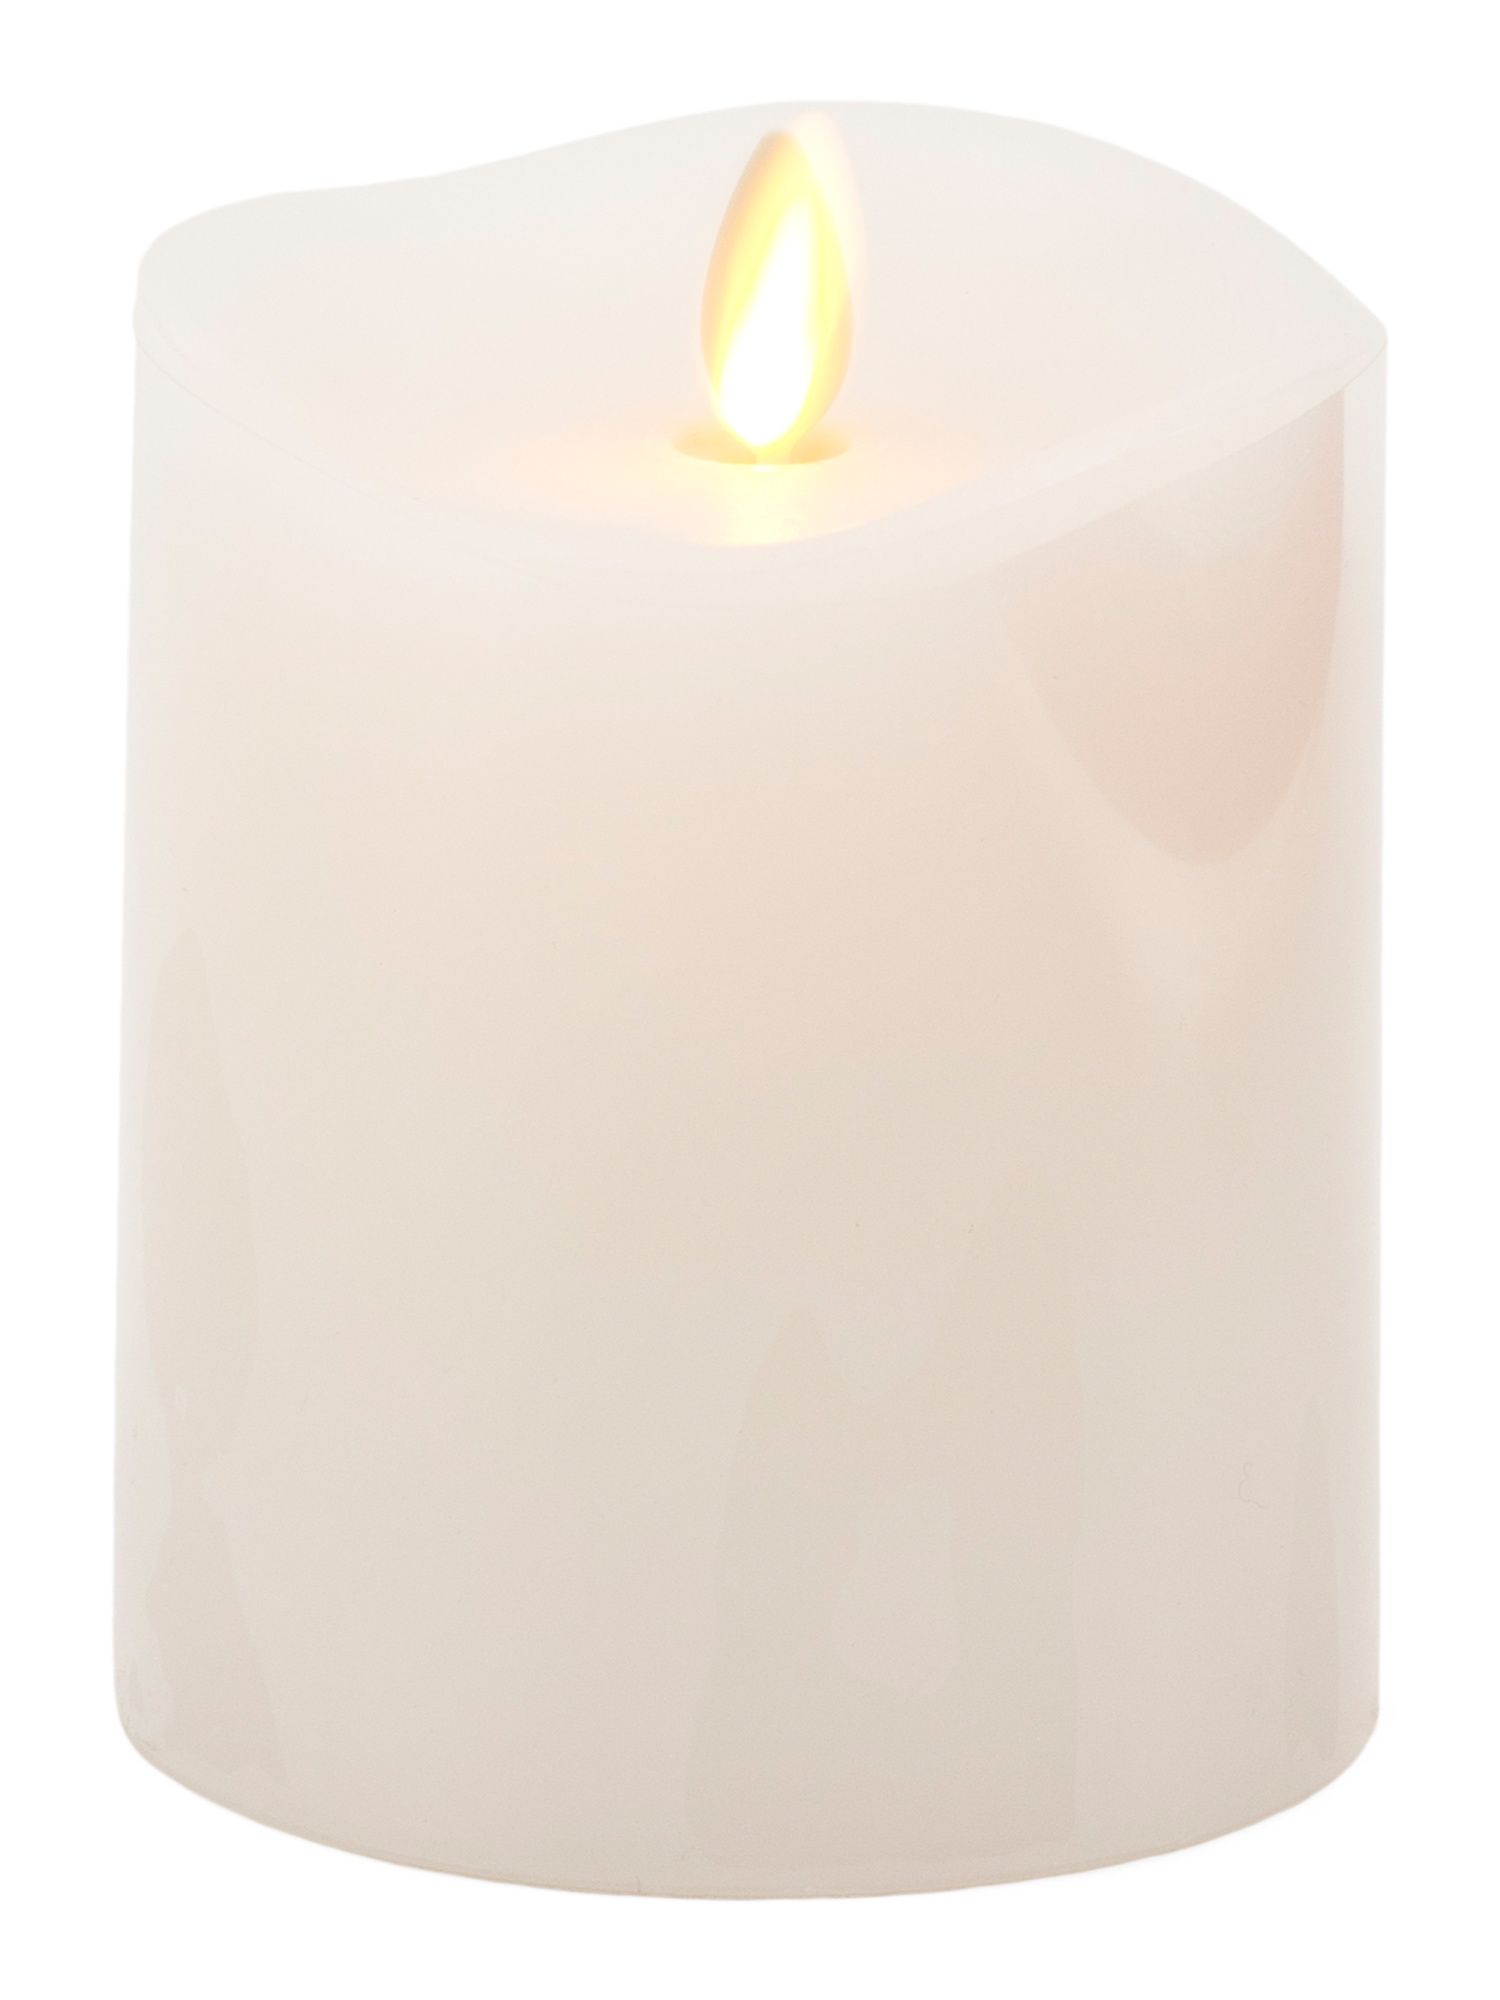 4.5in Melted Edge Led Pillar Candle | TJ Maxx